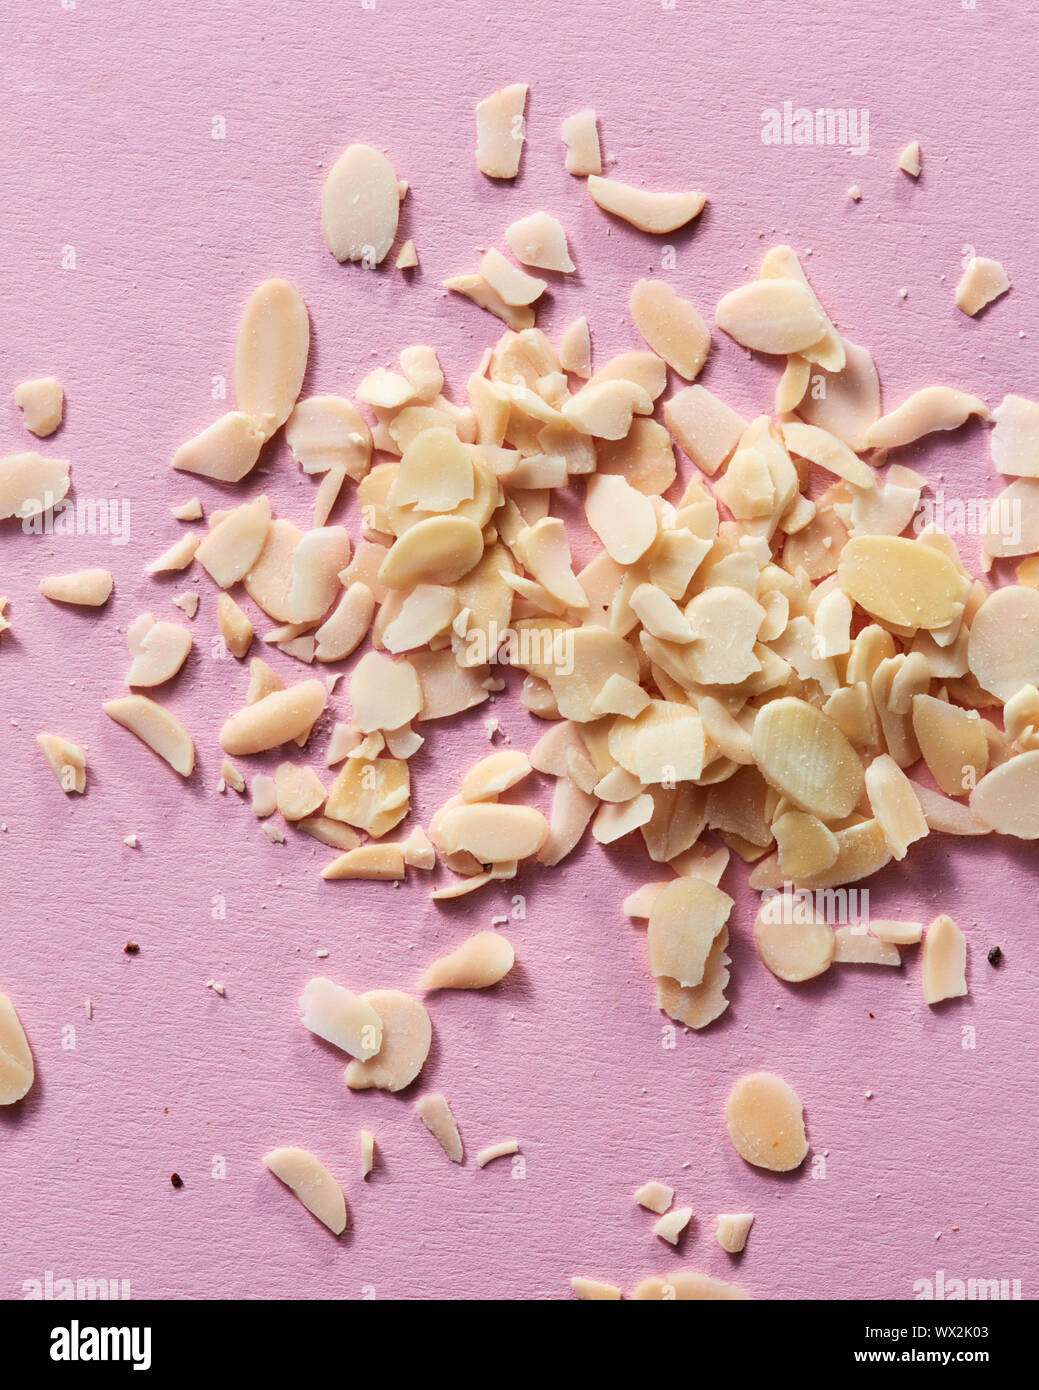 Slices of almond in the heap on a pink background. Close-up view Stock Photo